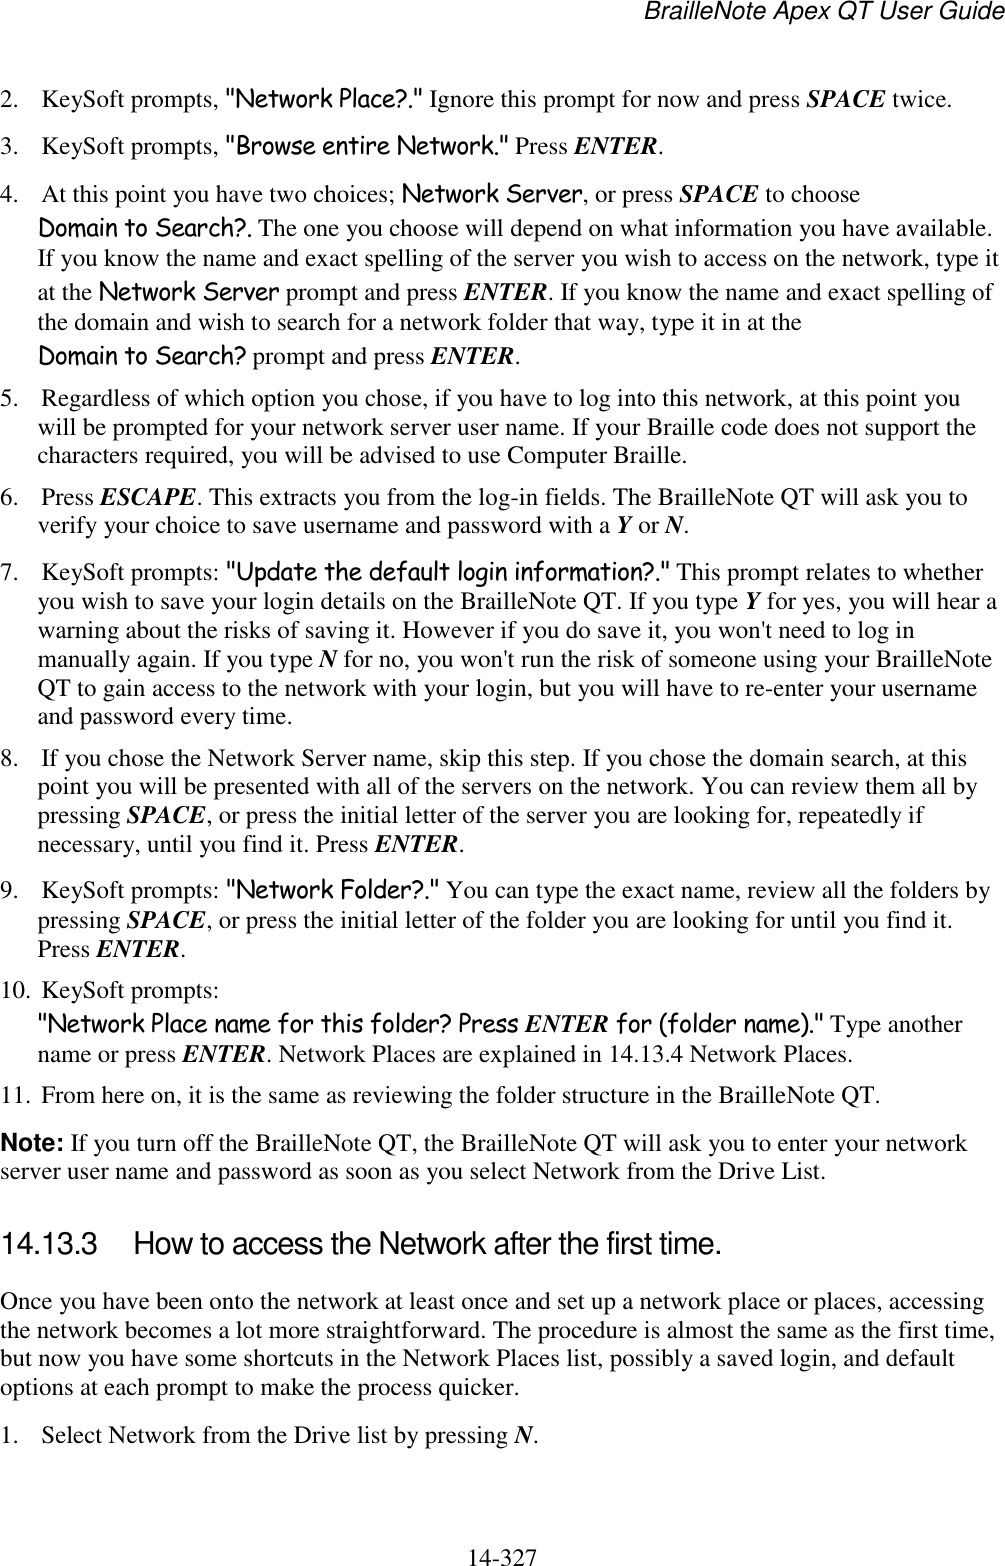 BrailleNote Apex QT User Guide  14-327   2. KeySoft prompts, &quot;Network Place?.&quot; Ignore this prompt for now and press SPACE twice.  3. KeySoft prompts, &quot;Browse entire Network.&quot; Press ENTER.  4. At this point you have two choices; Network Server, or press SPACE to choose Domain to Search?. The one you choose will depend on what information you have available. If you know the name and exact spelling of the server you wish to access on the network, type it at the Network Server prompt and press ENTER. If you know the name and exact spelling of the domain and wish to search for a network folder that way, type it in at the Domain to Search? prompt and press ENTER.  5. Regardless of which option you chose, if you have to log into this network, at this point you will be prompted for your network server user name. If your Braille code does not support the characters required, you will be advised to use Computer Braille.  6. Press ESCAPE. This extracts you from the log-in fields. The BrailleNote QT will ask you to verify your choice to save username and password with a Y or N. 7. KeySoft prompts: &quot;Update the default login information?.&quot; This prompt relates to whether you wish to save your login details on the BrailleNote QT. If you type Y for yes, you will hear a warning about the risks of saving it. However if you do save it, you won&apos;t need to log in manually again. If you type N for no, you won&apos;t run the risk of someone using your BrailleNote QT to gain access to the network with your login, but you will have to re-enter your username and password every time. 8. If you chose the Network Server name, skip this step. If you chose the domain search, at this point you will be presented with all of the servers on the network. You can review them all by pressing SPACE, or press the initial letter of the server you are looking for, repeatedly if necessary, until you find it. Press ENTER. 9. KeySoft prompts: &quot;Network Folder?.&quot; You can type the exact name, review all the folders by pressing SPACE, or press the initial letter of the folder you are looking for until you find it. Press ENTER. 10. KeySoft prompts: &quot;Network Place name for this folder? Press ENTER for (folder name).&quot; Type another name or press ENTER. Network Places are explained in 14.13.4 Network Places. 11. From here on, it is the same as reviewing the folder structure in the BrailleNote QT. Note: If you turn off the BrailleNote QT, the BrailleNote QT will ask you to enter your network server user name and password as soon as you select Network from the Drive List.   14.13.3  How to access the Network after the first time. Once you have been onto the network at least once and set up a network place or places, accessing the network becomes a lot more straightforward. The procedure is almost the same as the first time, but now you have some shortcuts in the Network Places list, possibly a saved login, and default options at each prompt to make the process quicker. 1. Select Network from the Drive list by pressing N. 